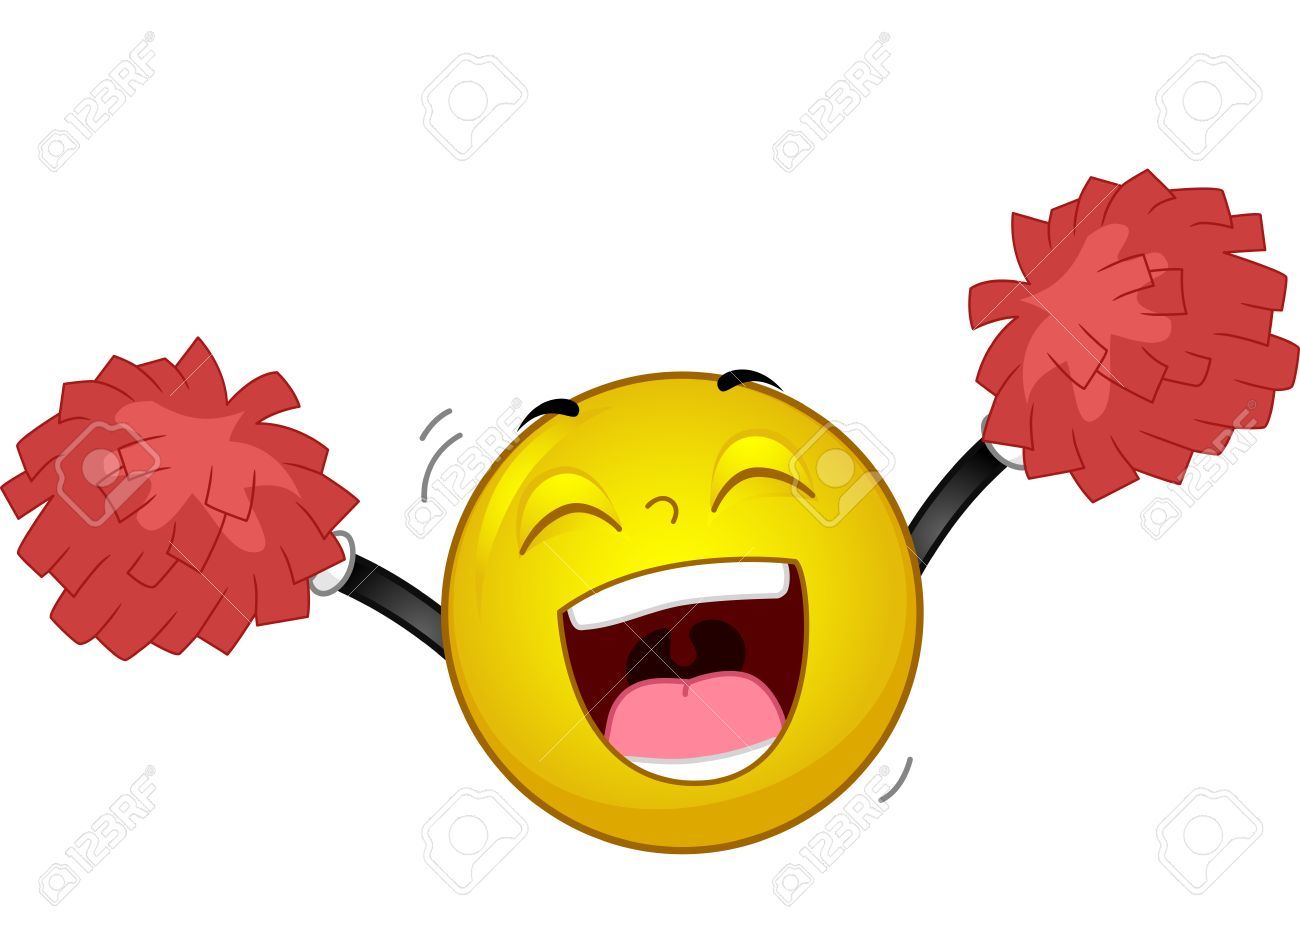 54949275-Mascot-Illustration-of-a-Happy-Smiley-Cheers-while-handling-Pompoms-Stock-Photo.jpg